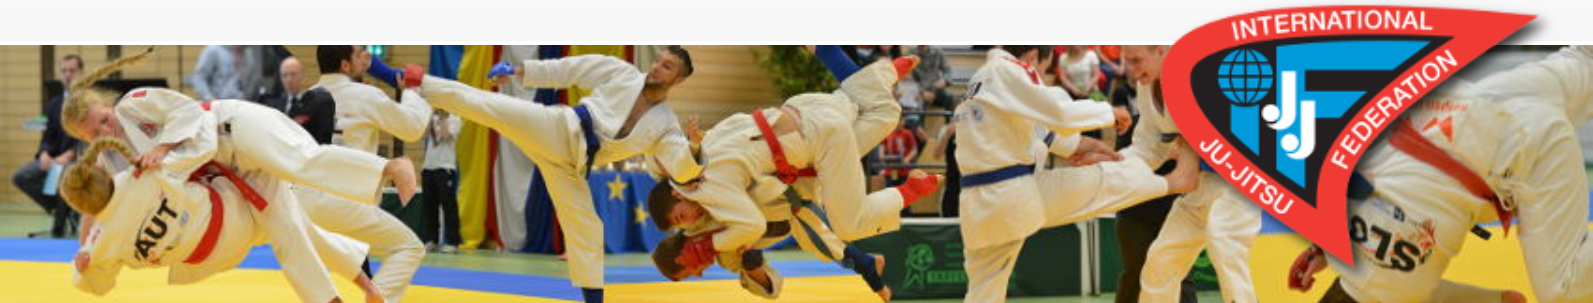 Ju-jitsu competition at the 2018 Asian Games is due to begin tomorrow ©JJIF